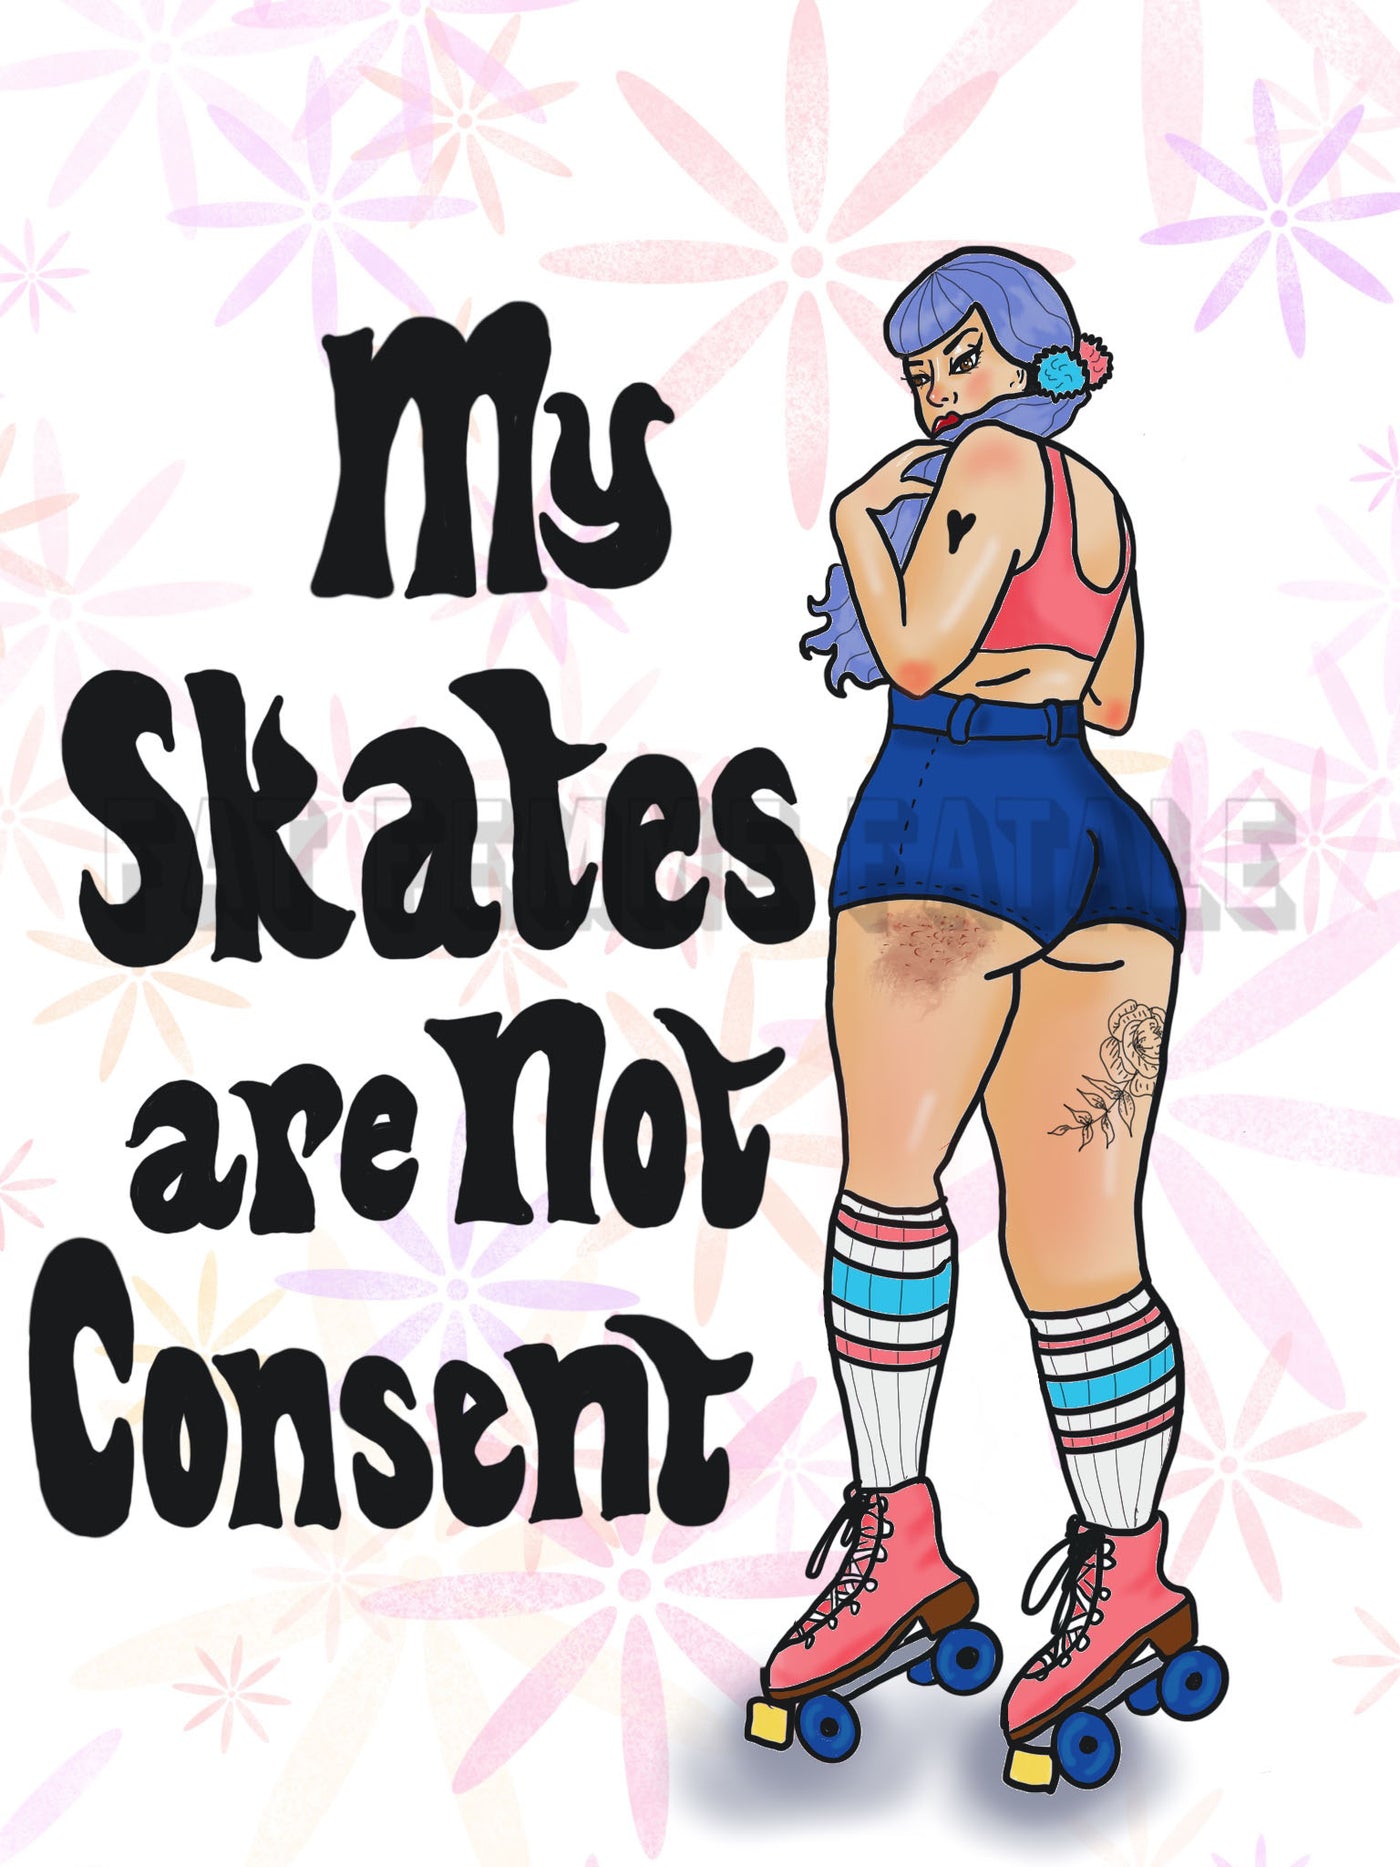 My Skates Are Not Consent Print